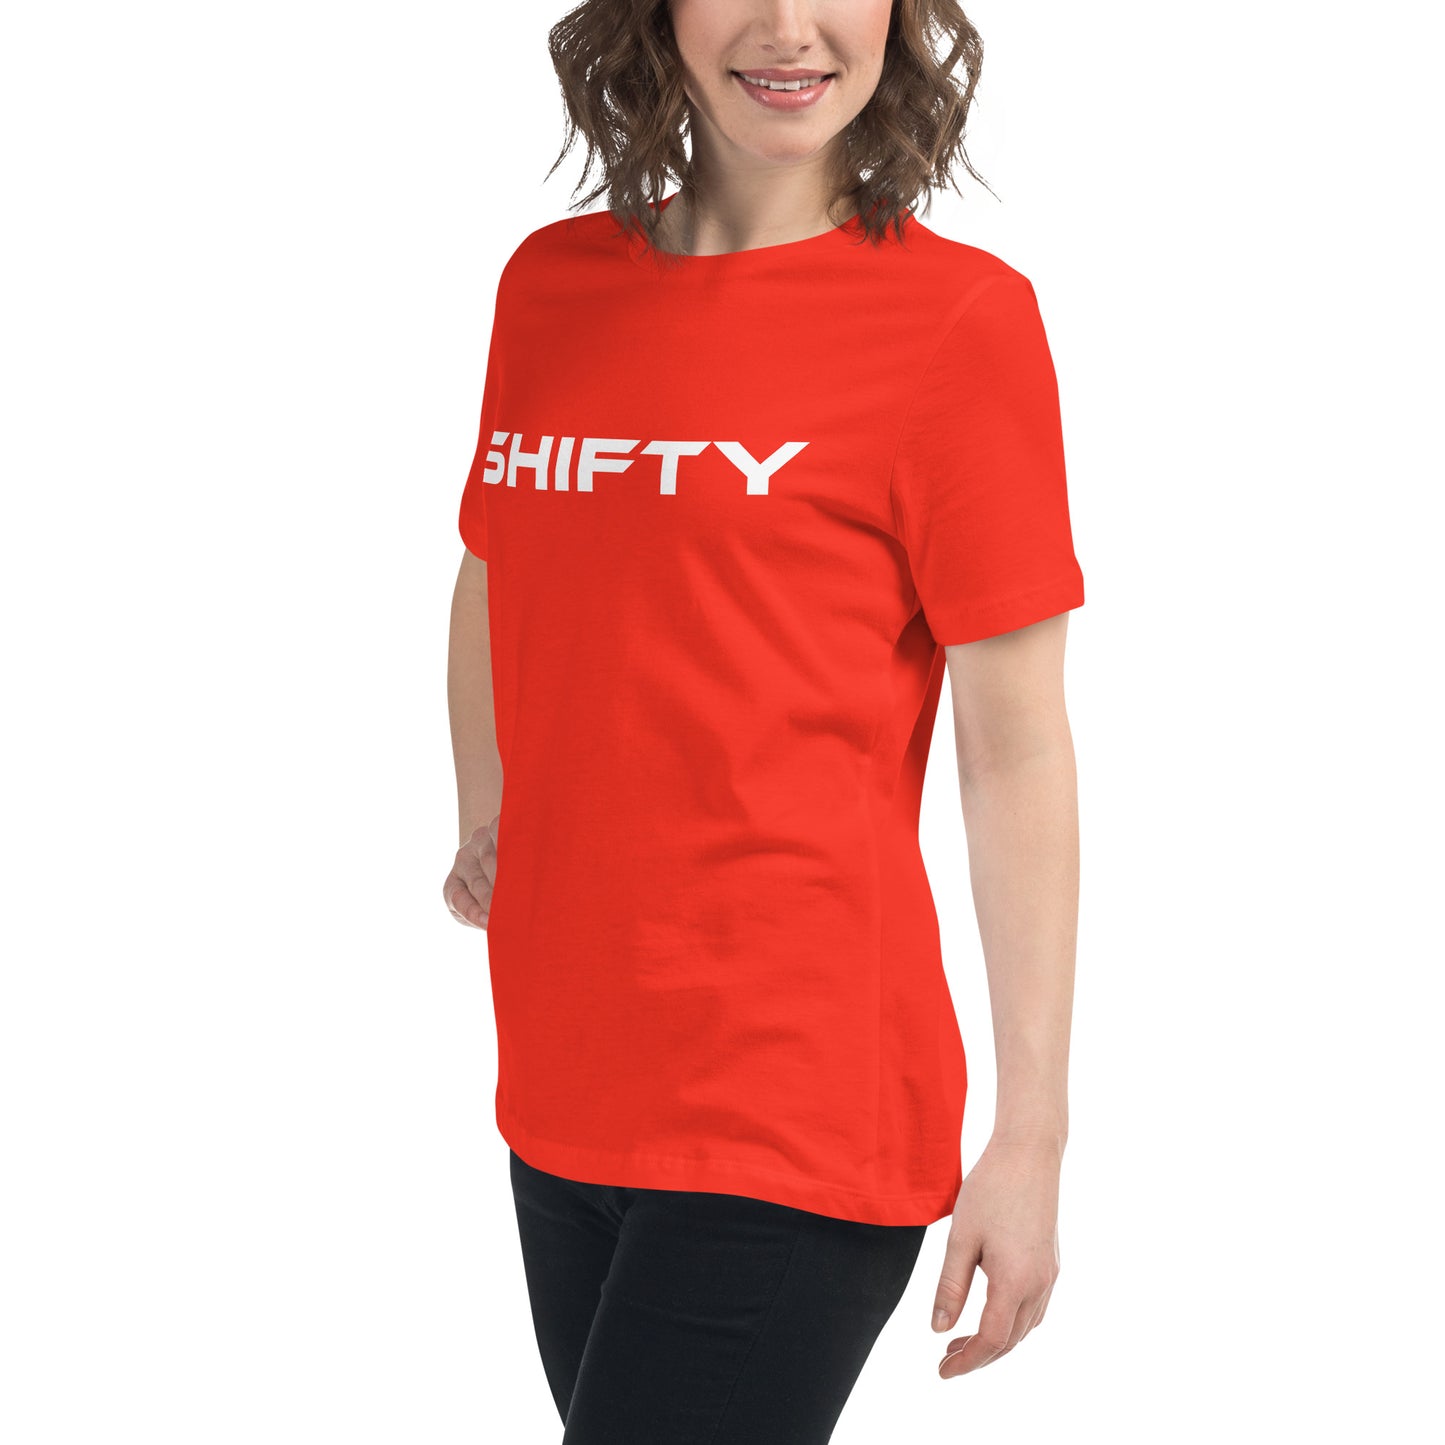 Shifty Women’s Relaxed Fit T-Shirt - Stylish and Comfy Everyday Tee